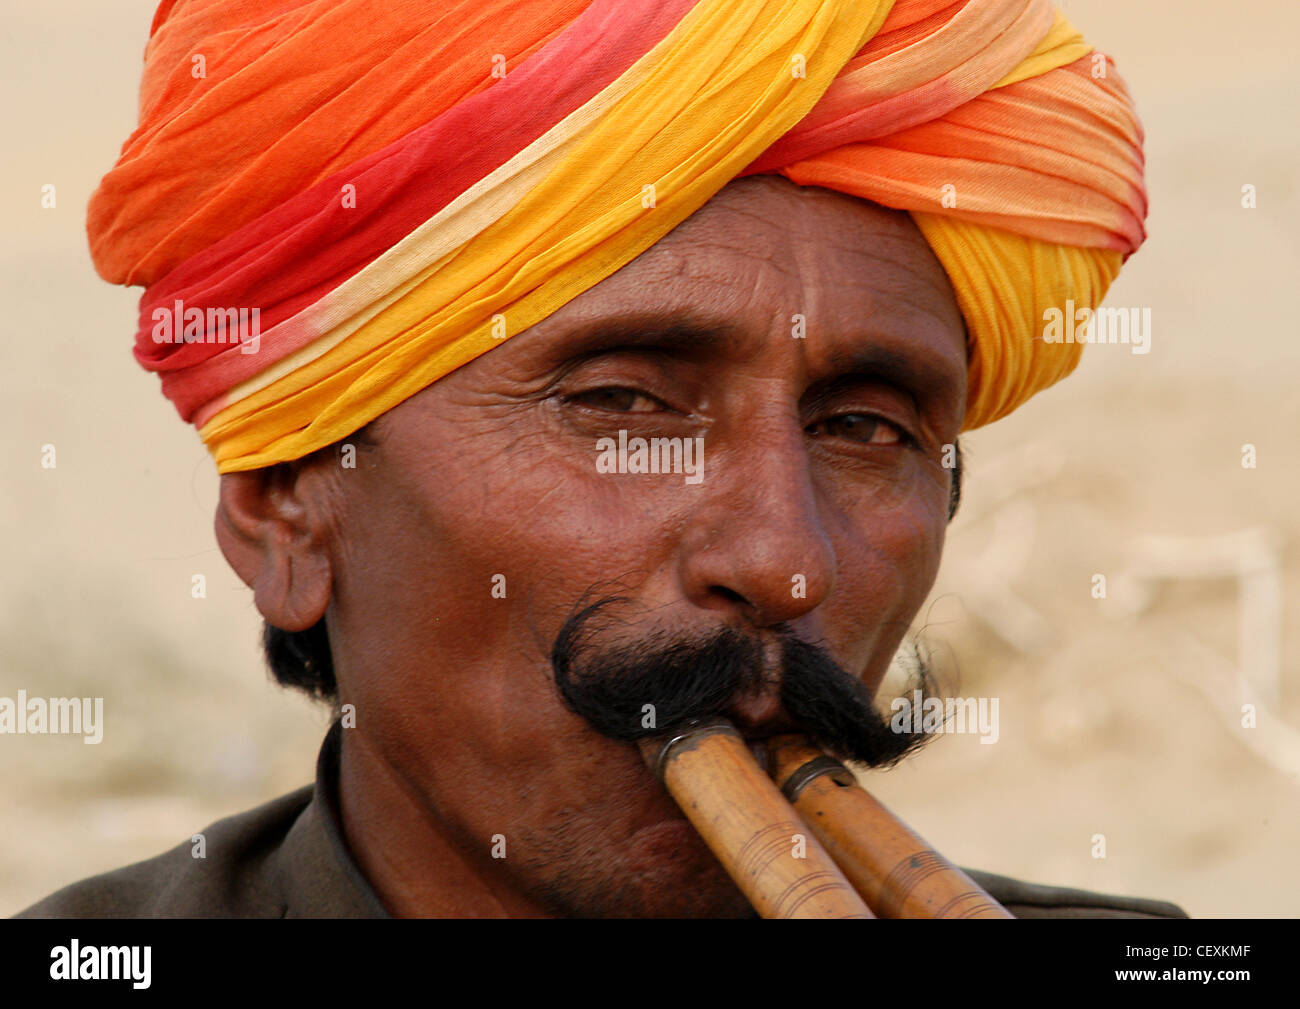 Rajput man with mustache playing unique classical music remarkably with two flutes entertaining tourists in Rajasthan desert. Stock Photo